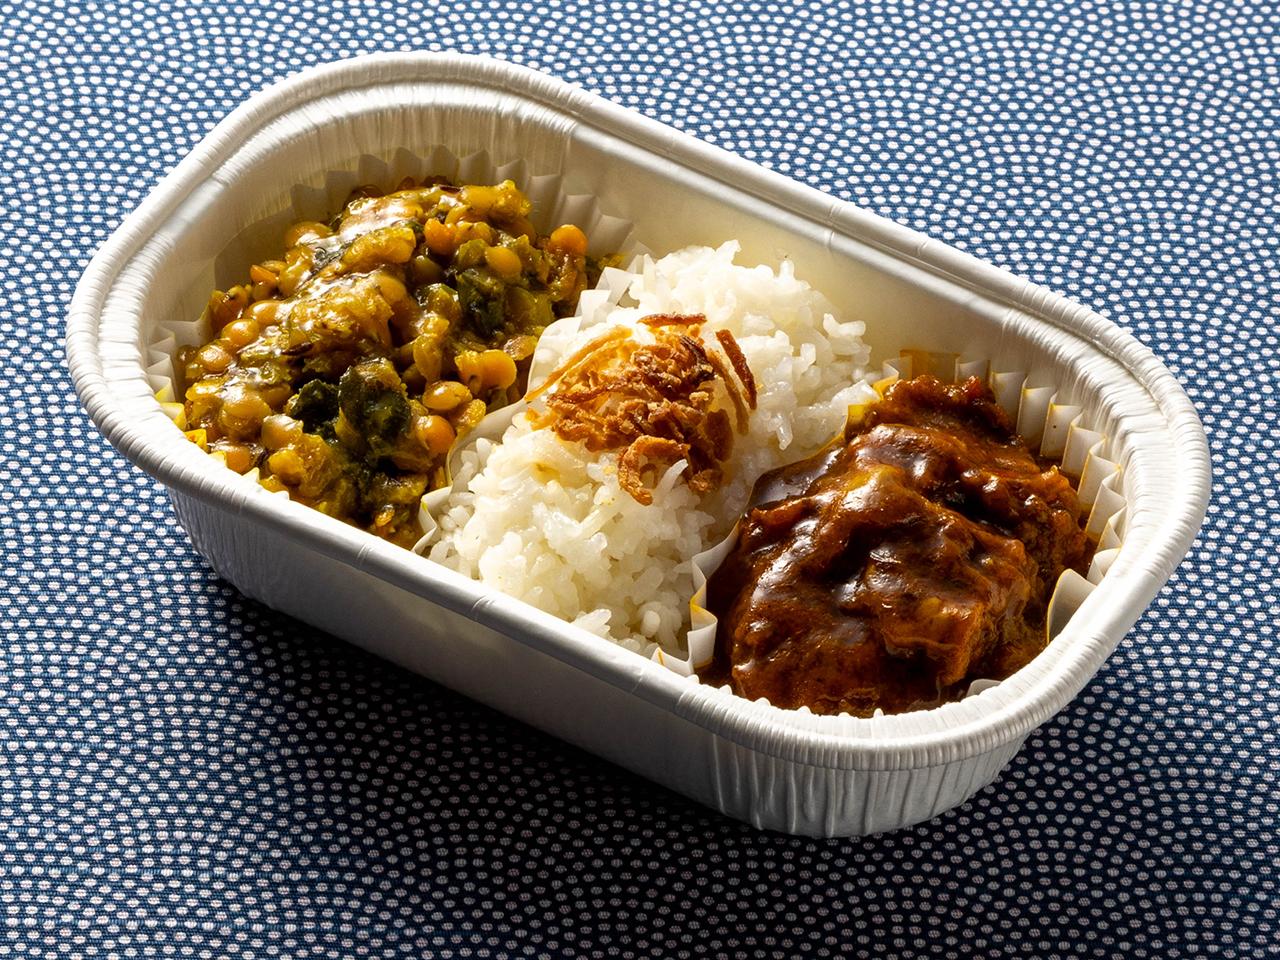 Photograph of in-flight meal Halal Meal